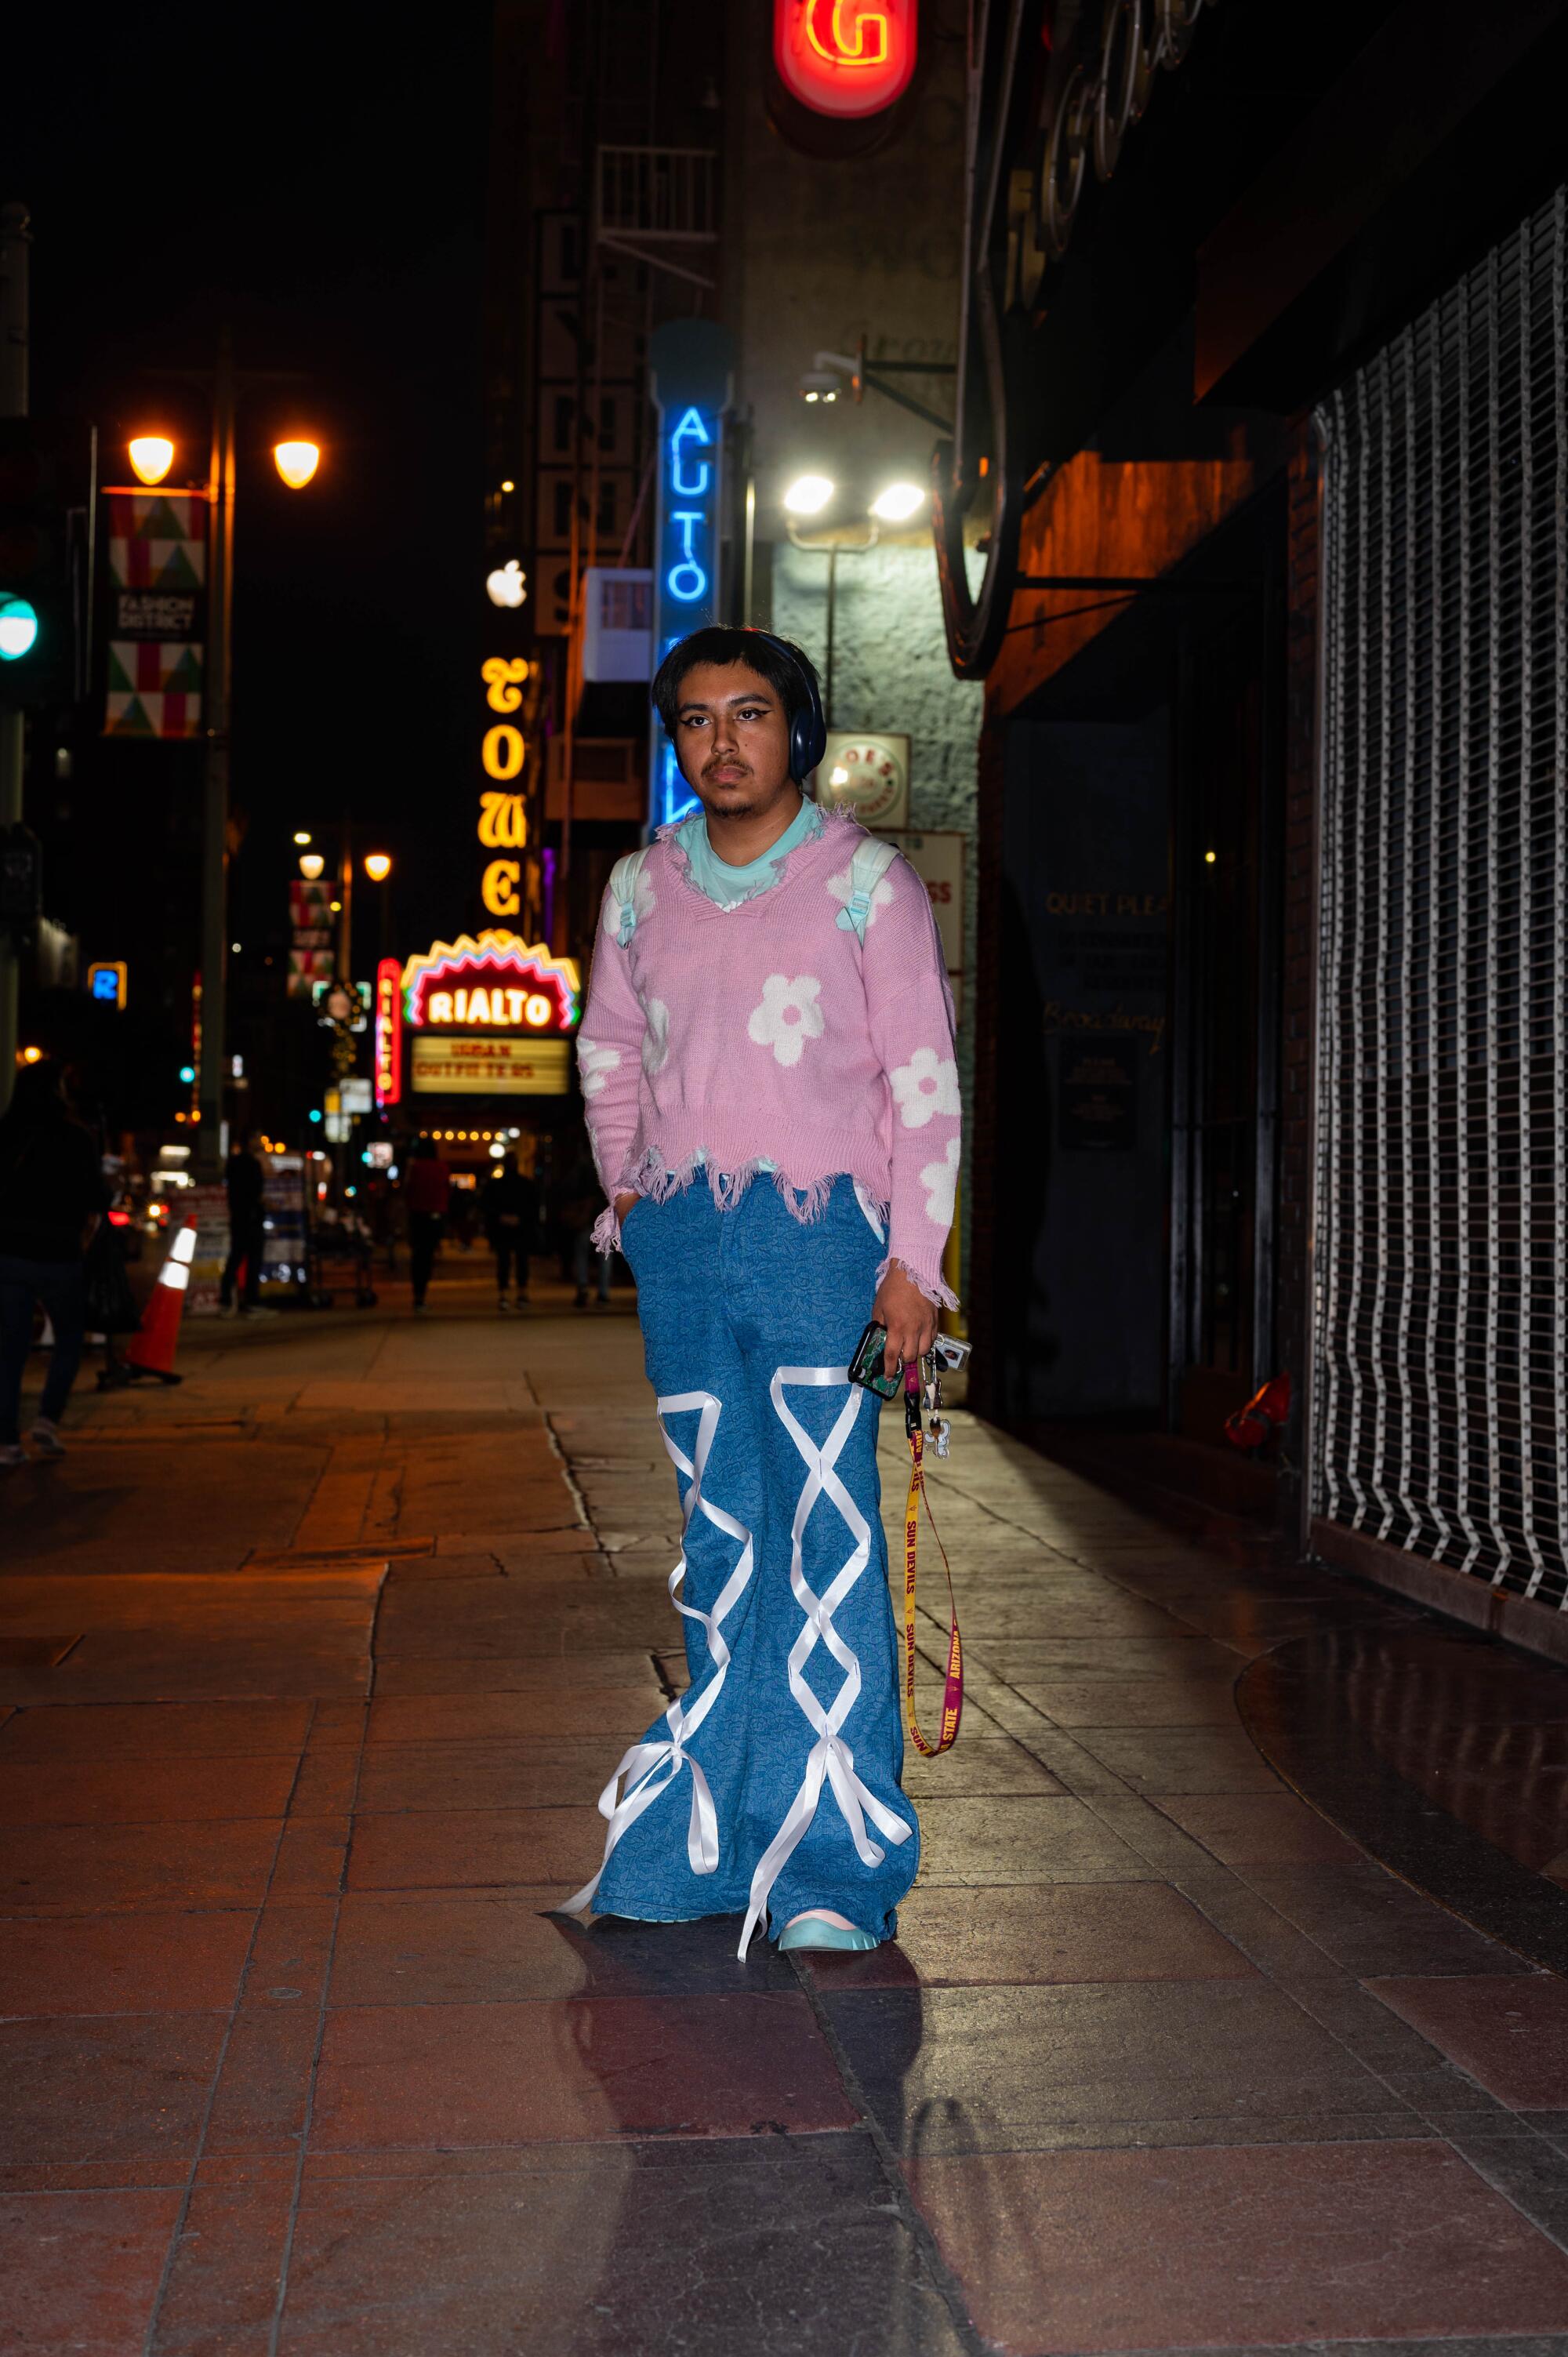 A person in blue pants and a pink blouse is standing on the sidewalk, with neon signs behind them.